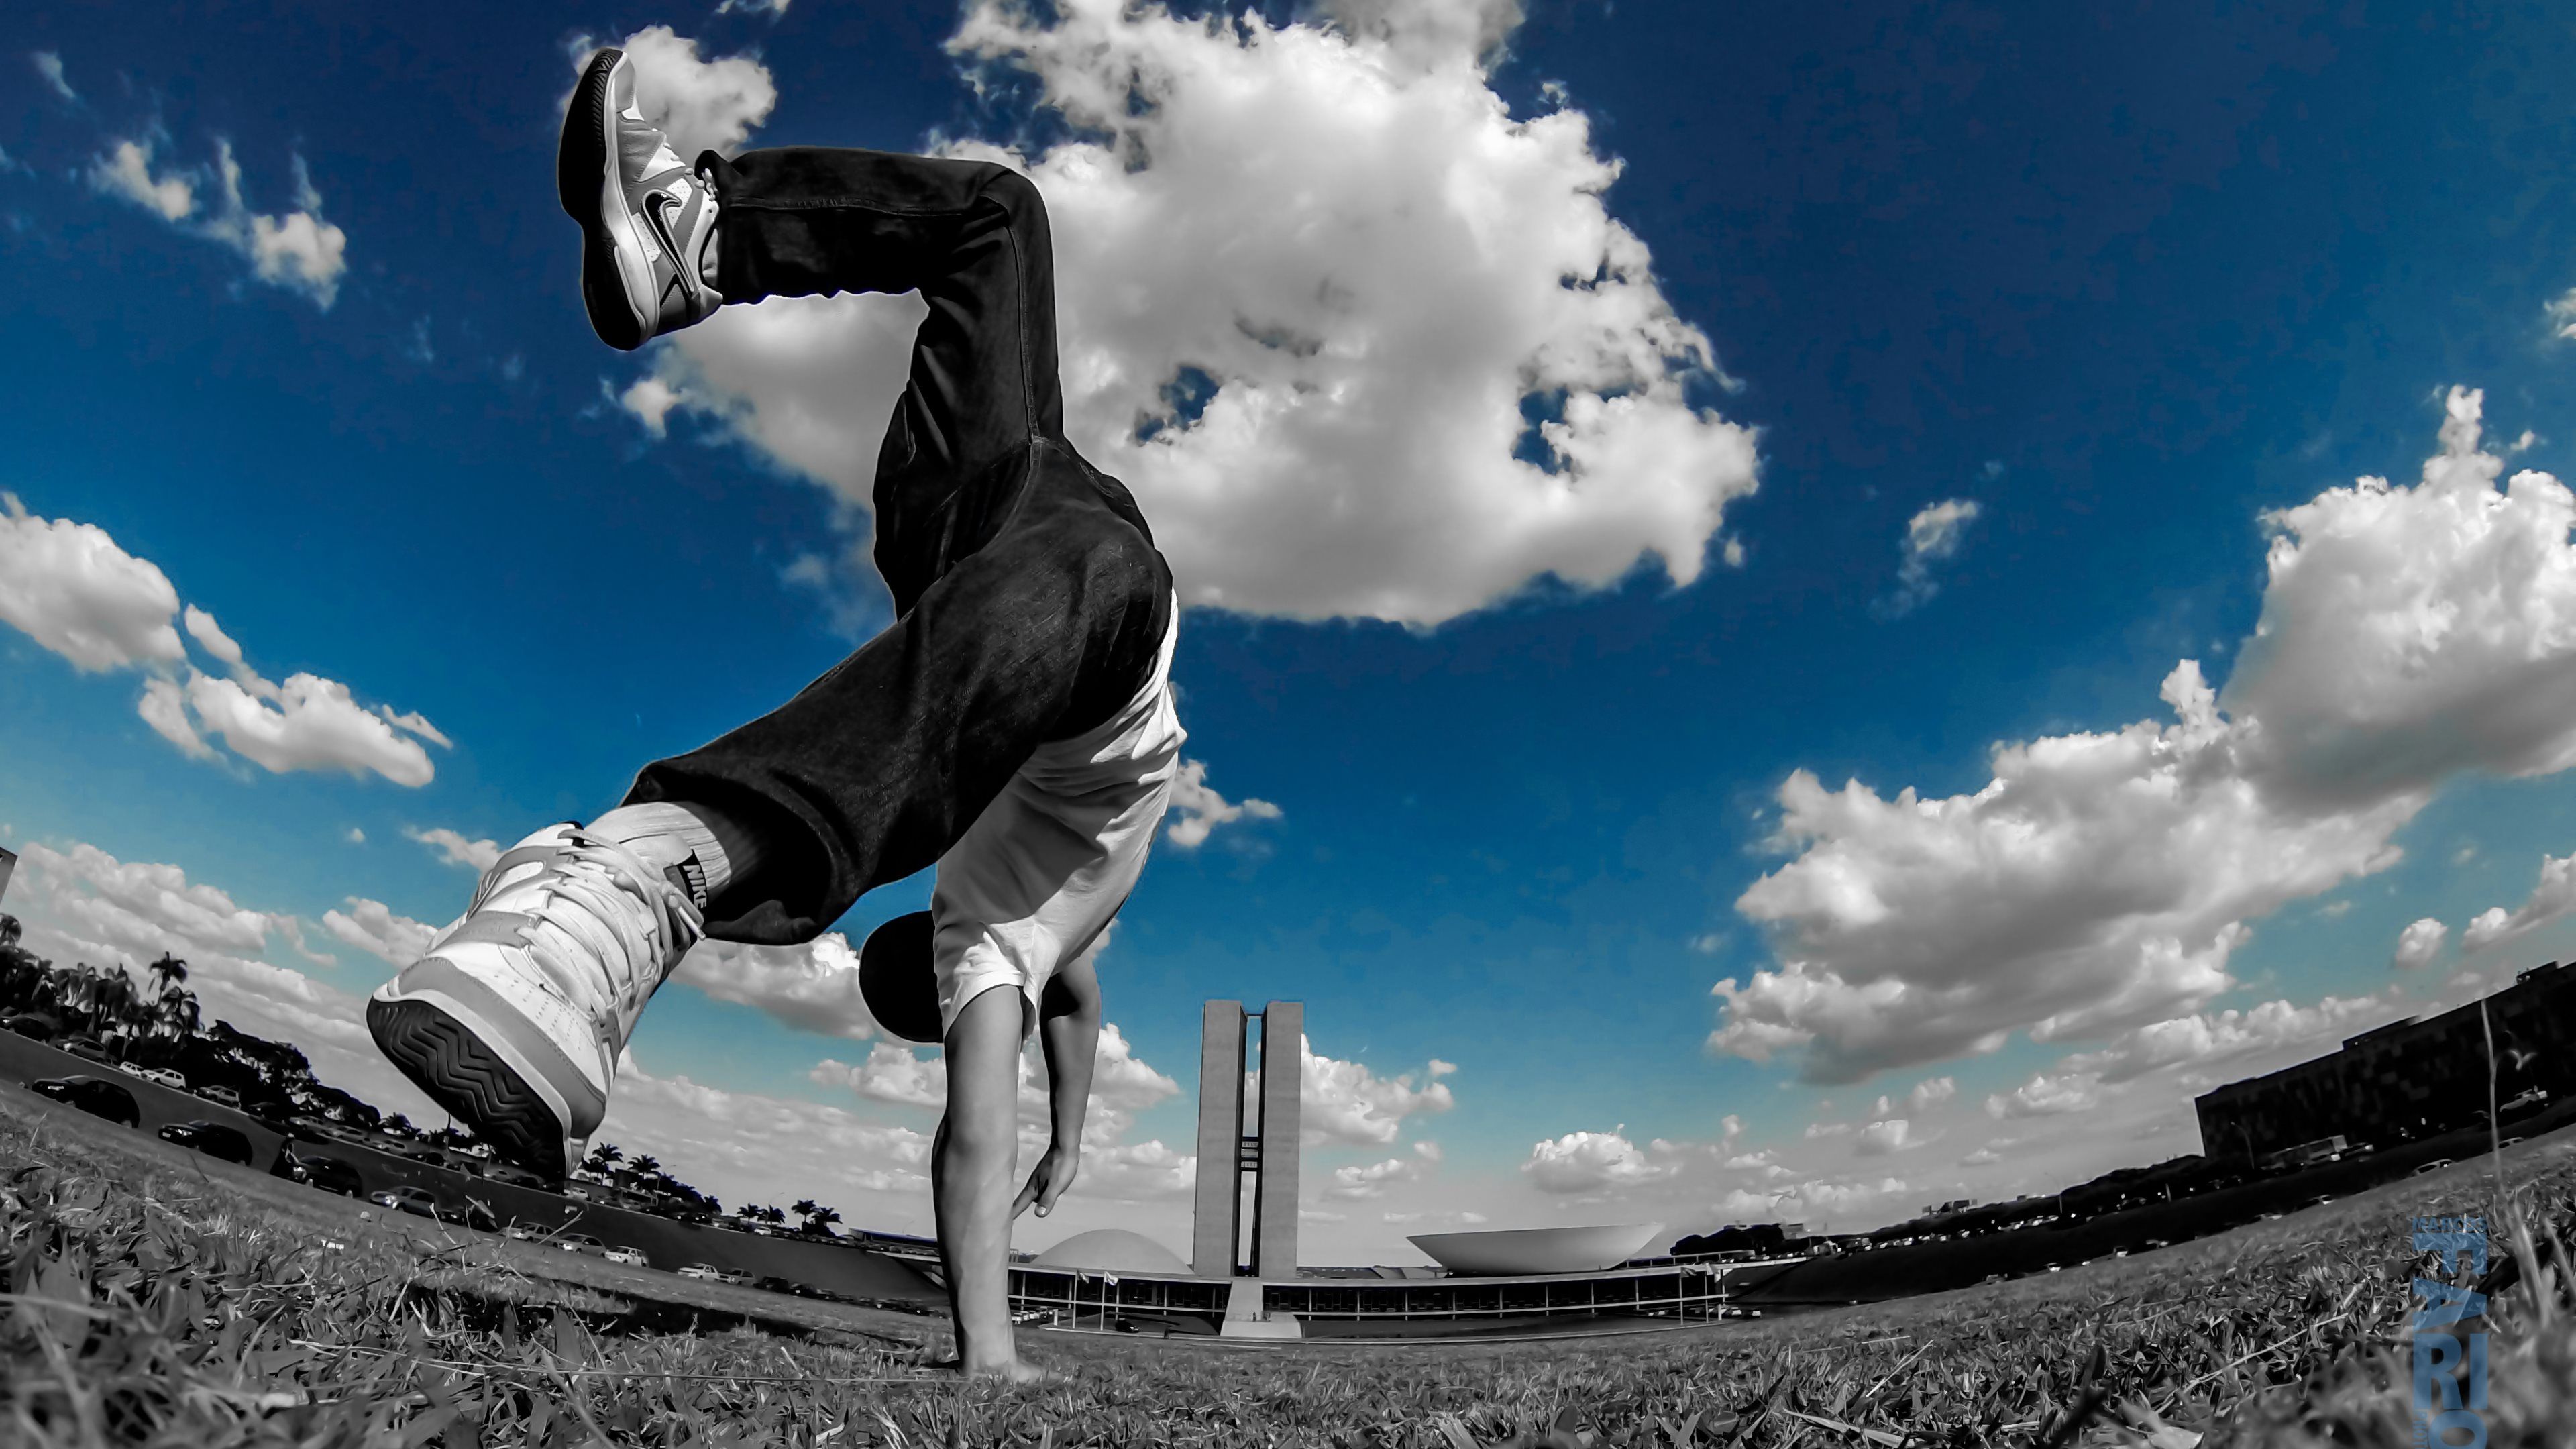 Backflip at Parkour Wallpapers :: HD Wallpapers